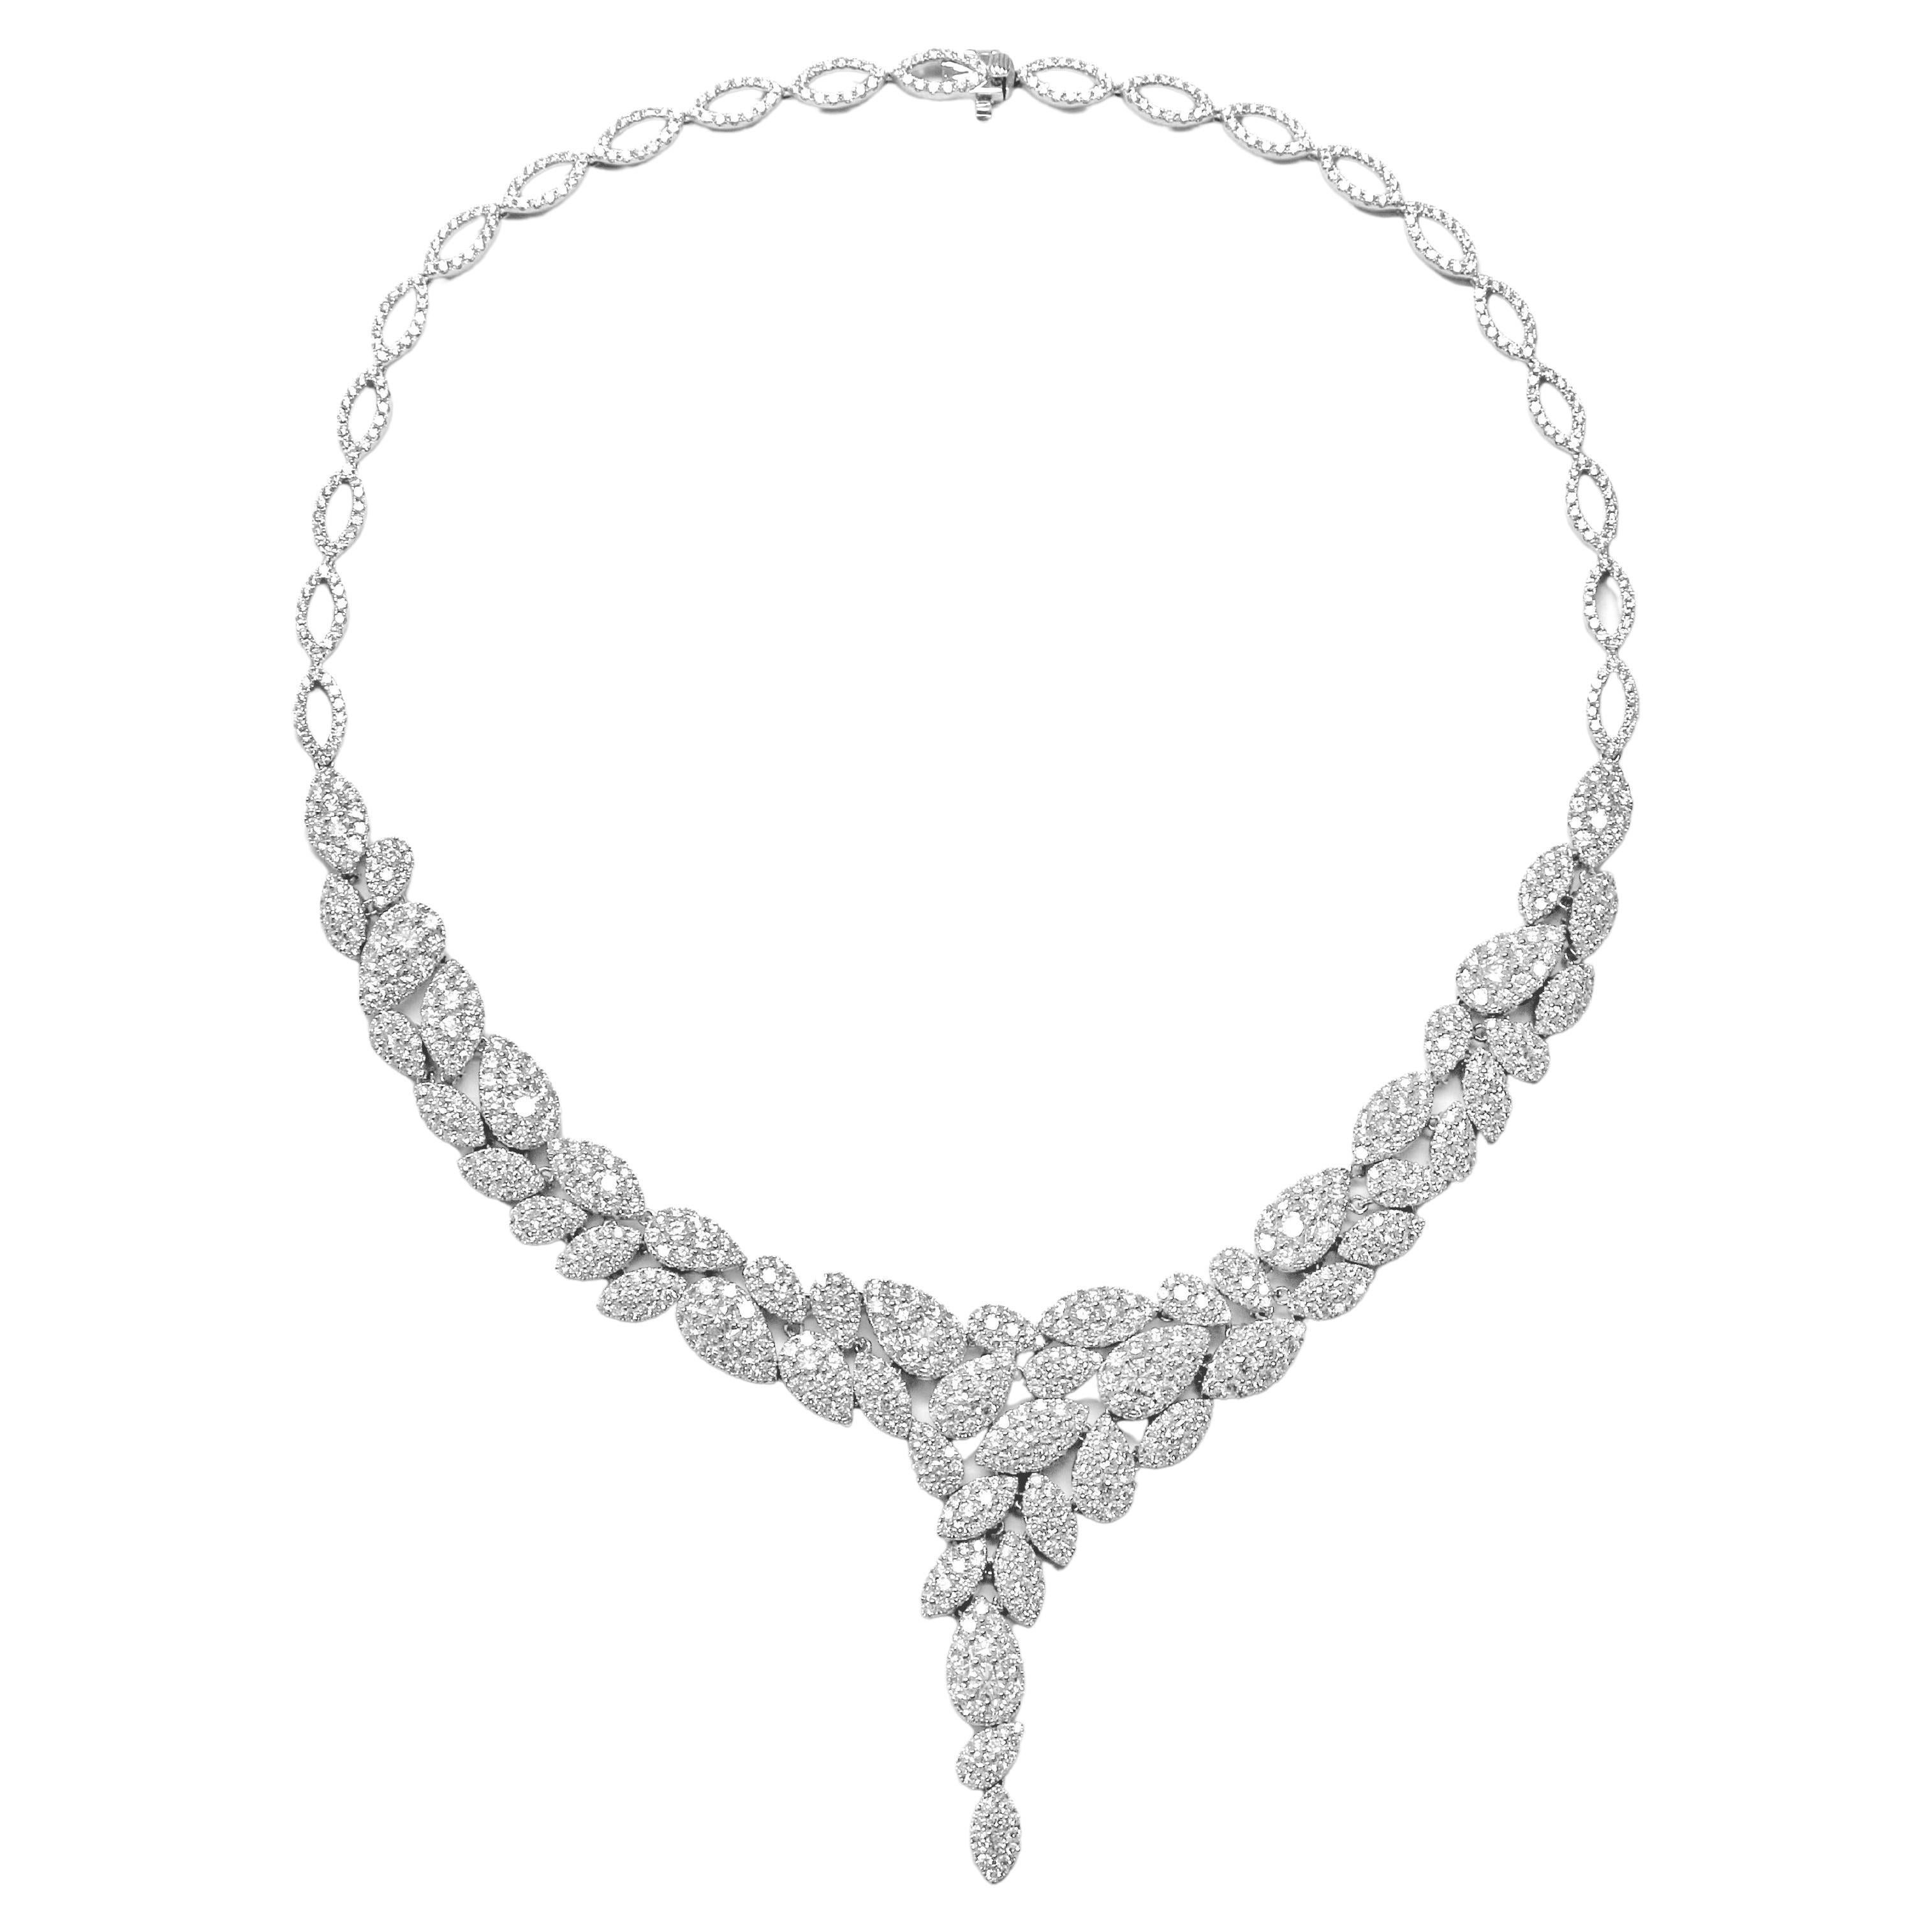 Captivating 18KW Diamond Necklace - 22.08ct, G Color, SI1 Clarity